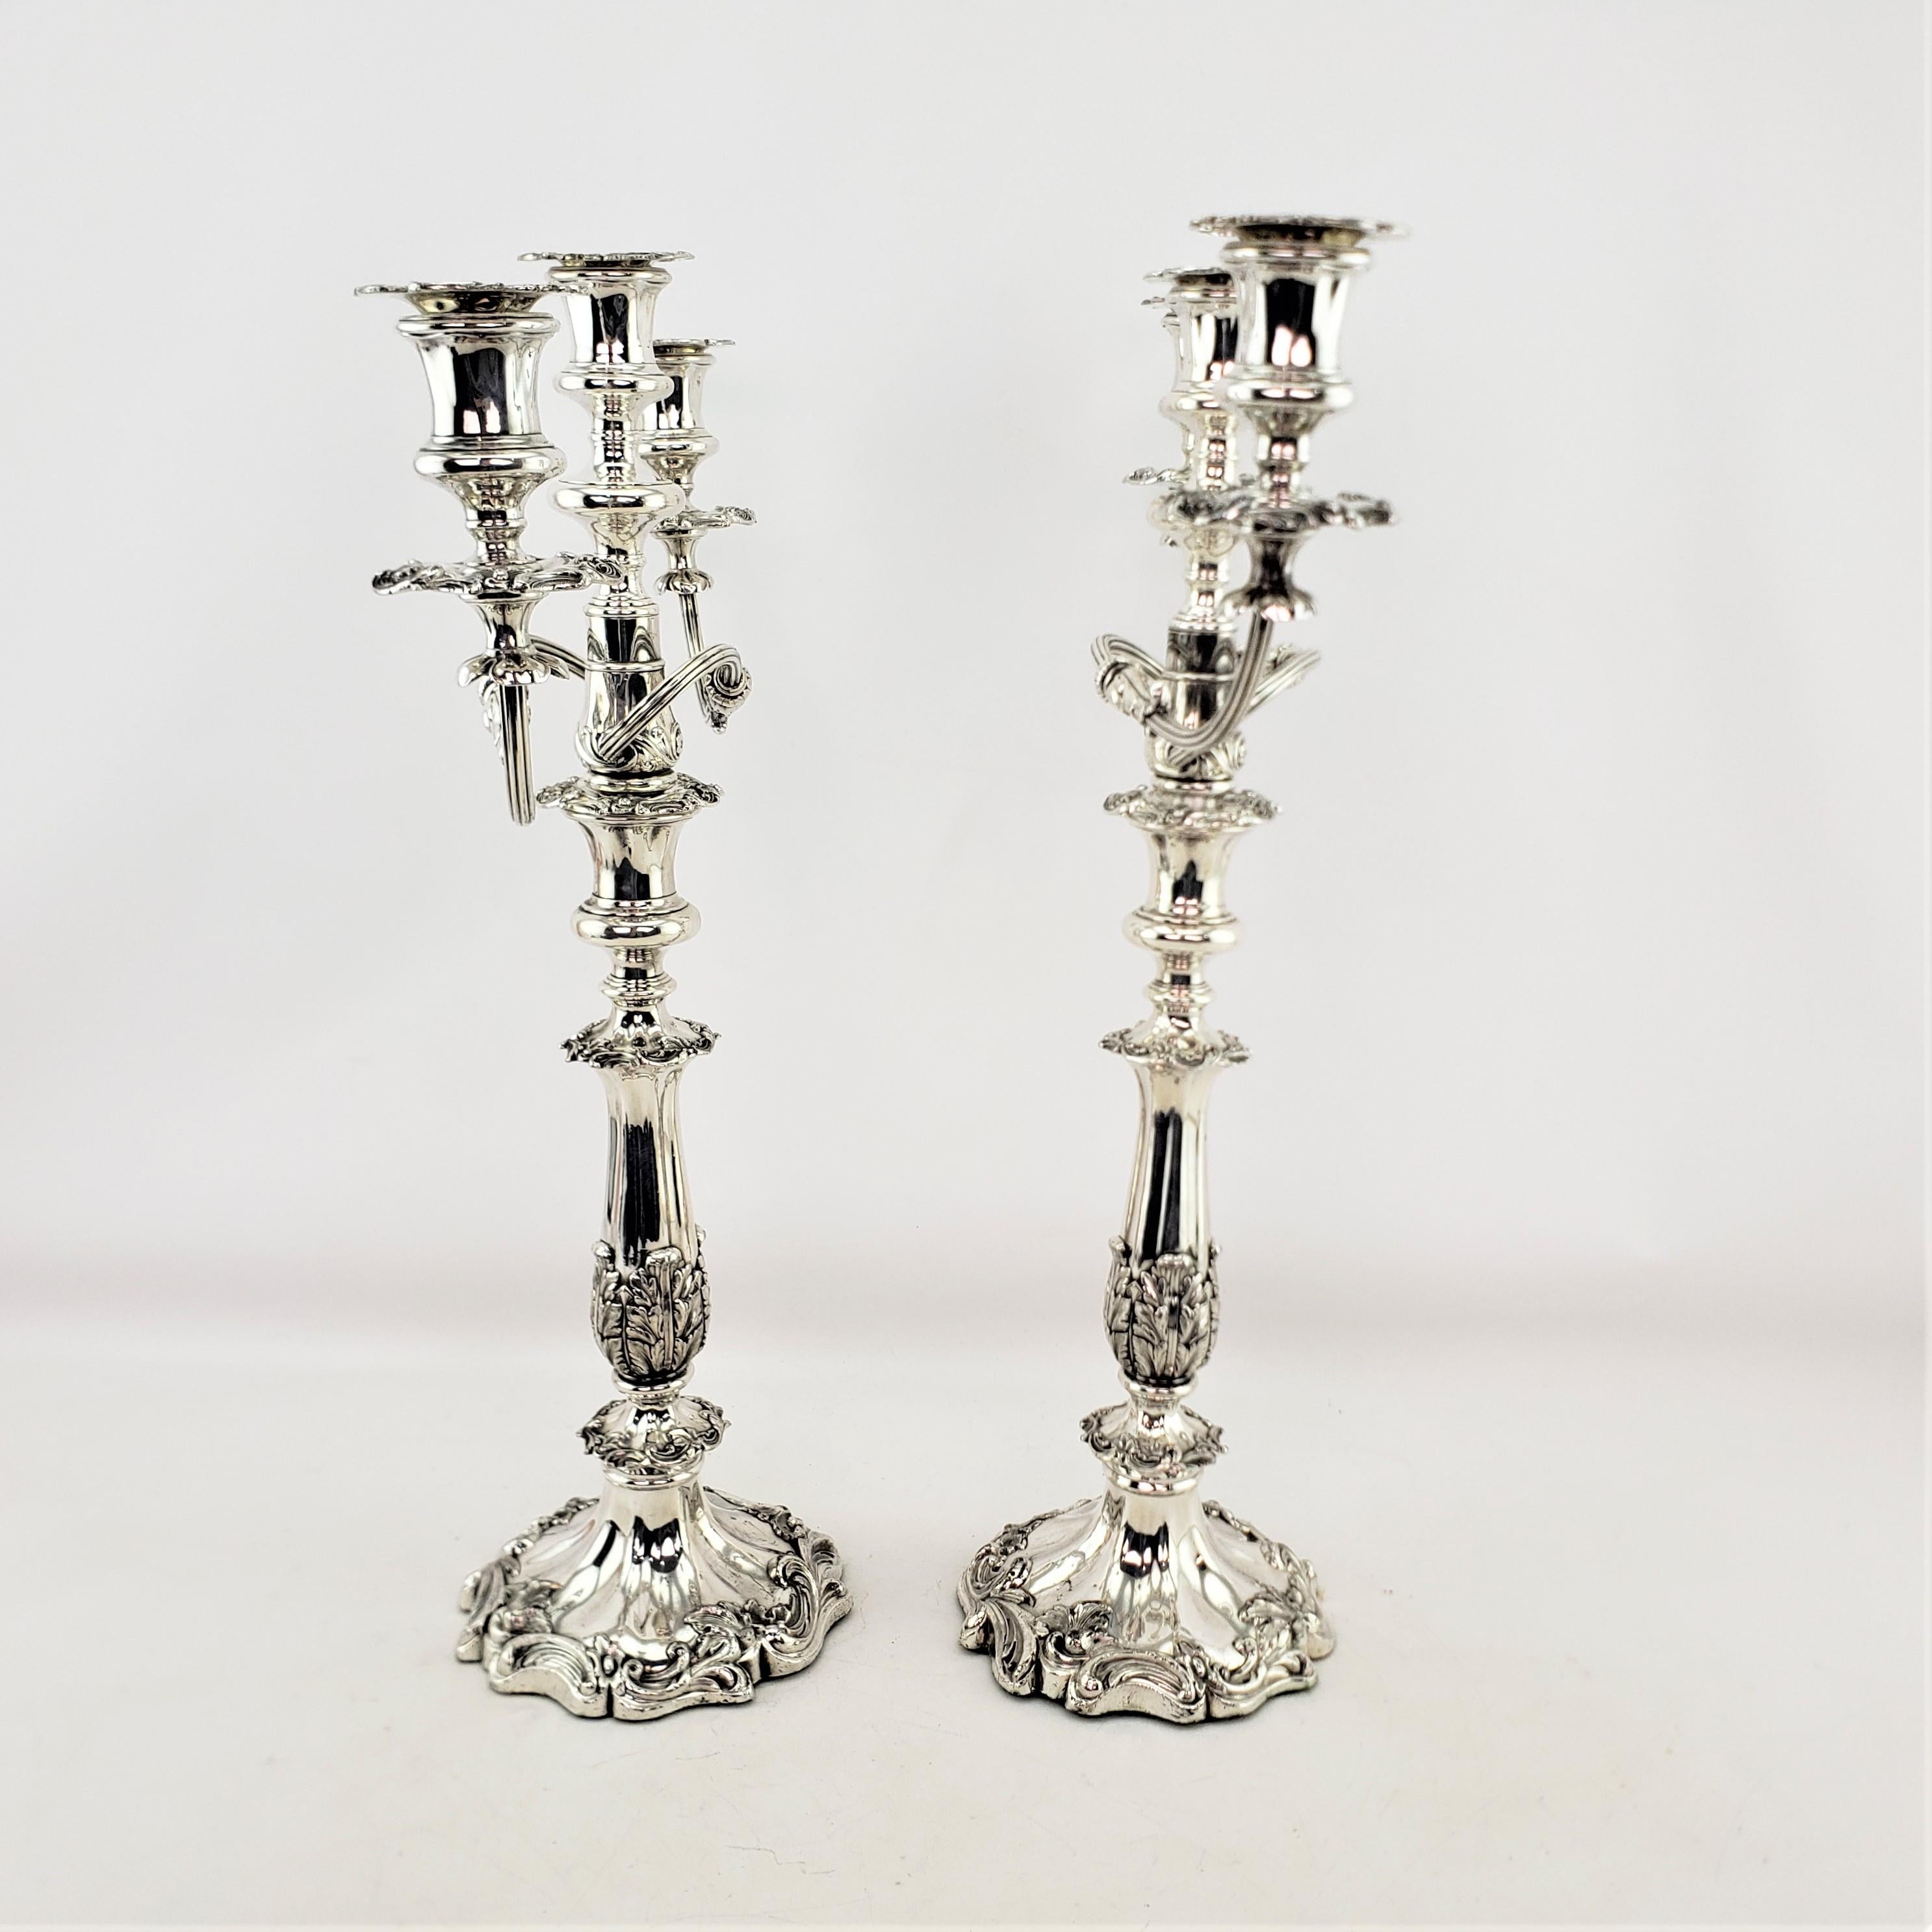 19th Century Antique Silver Plated Convertible Candelabras or Candlesticks with Leaf Decor For Sale